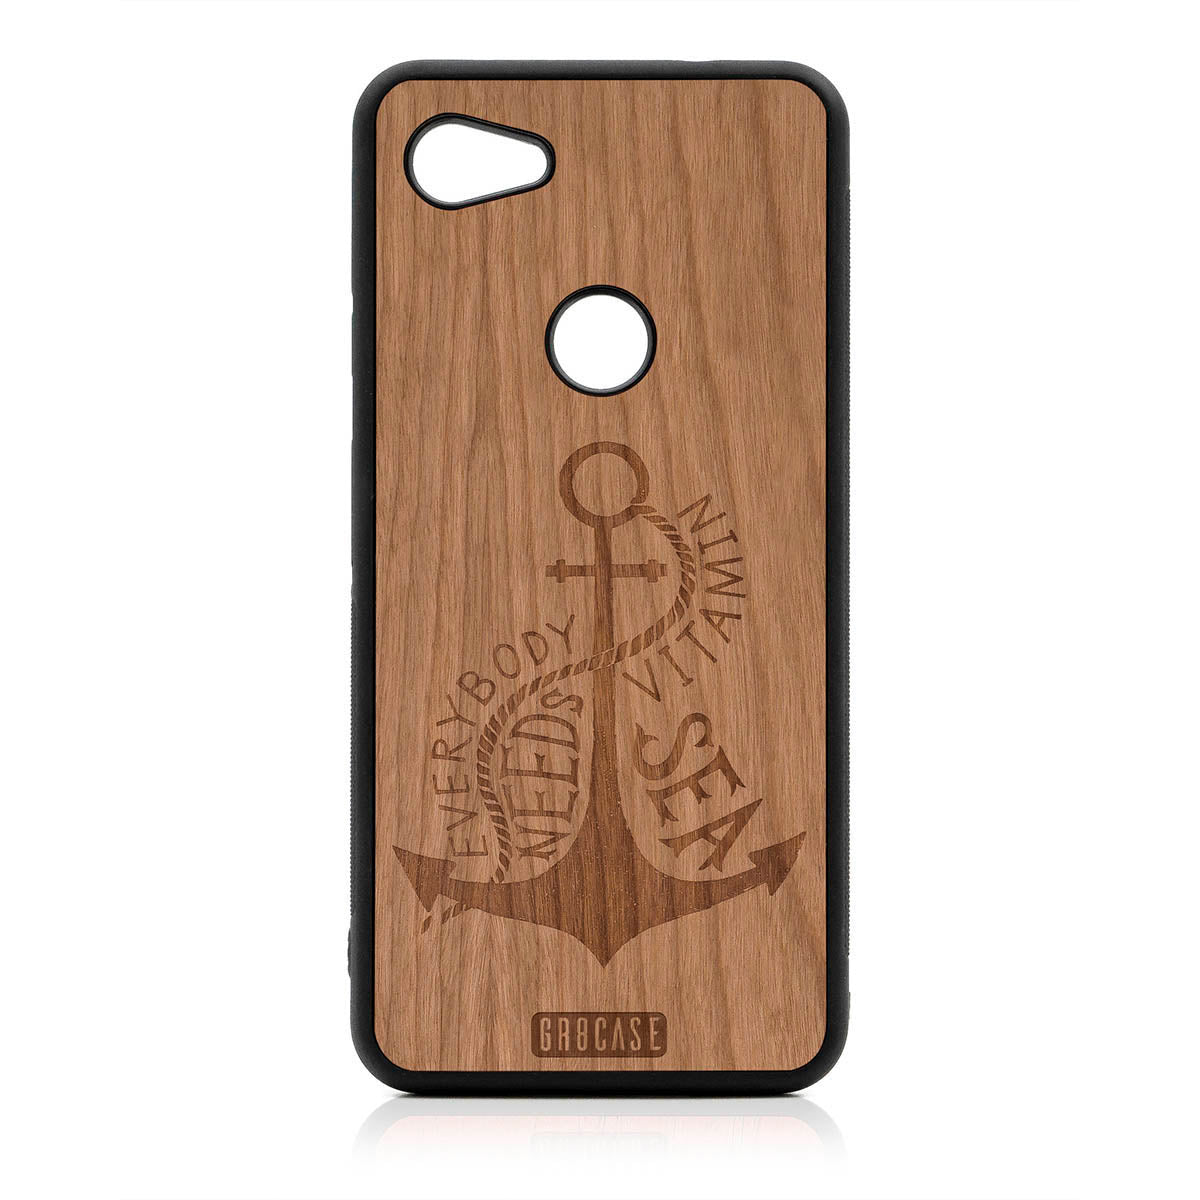 Everybody Needs Vitamin Sea (Anchor) Design Wood Case For Google Pixel 3A by GR8CASE